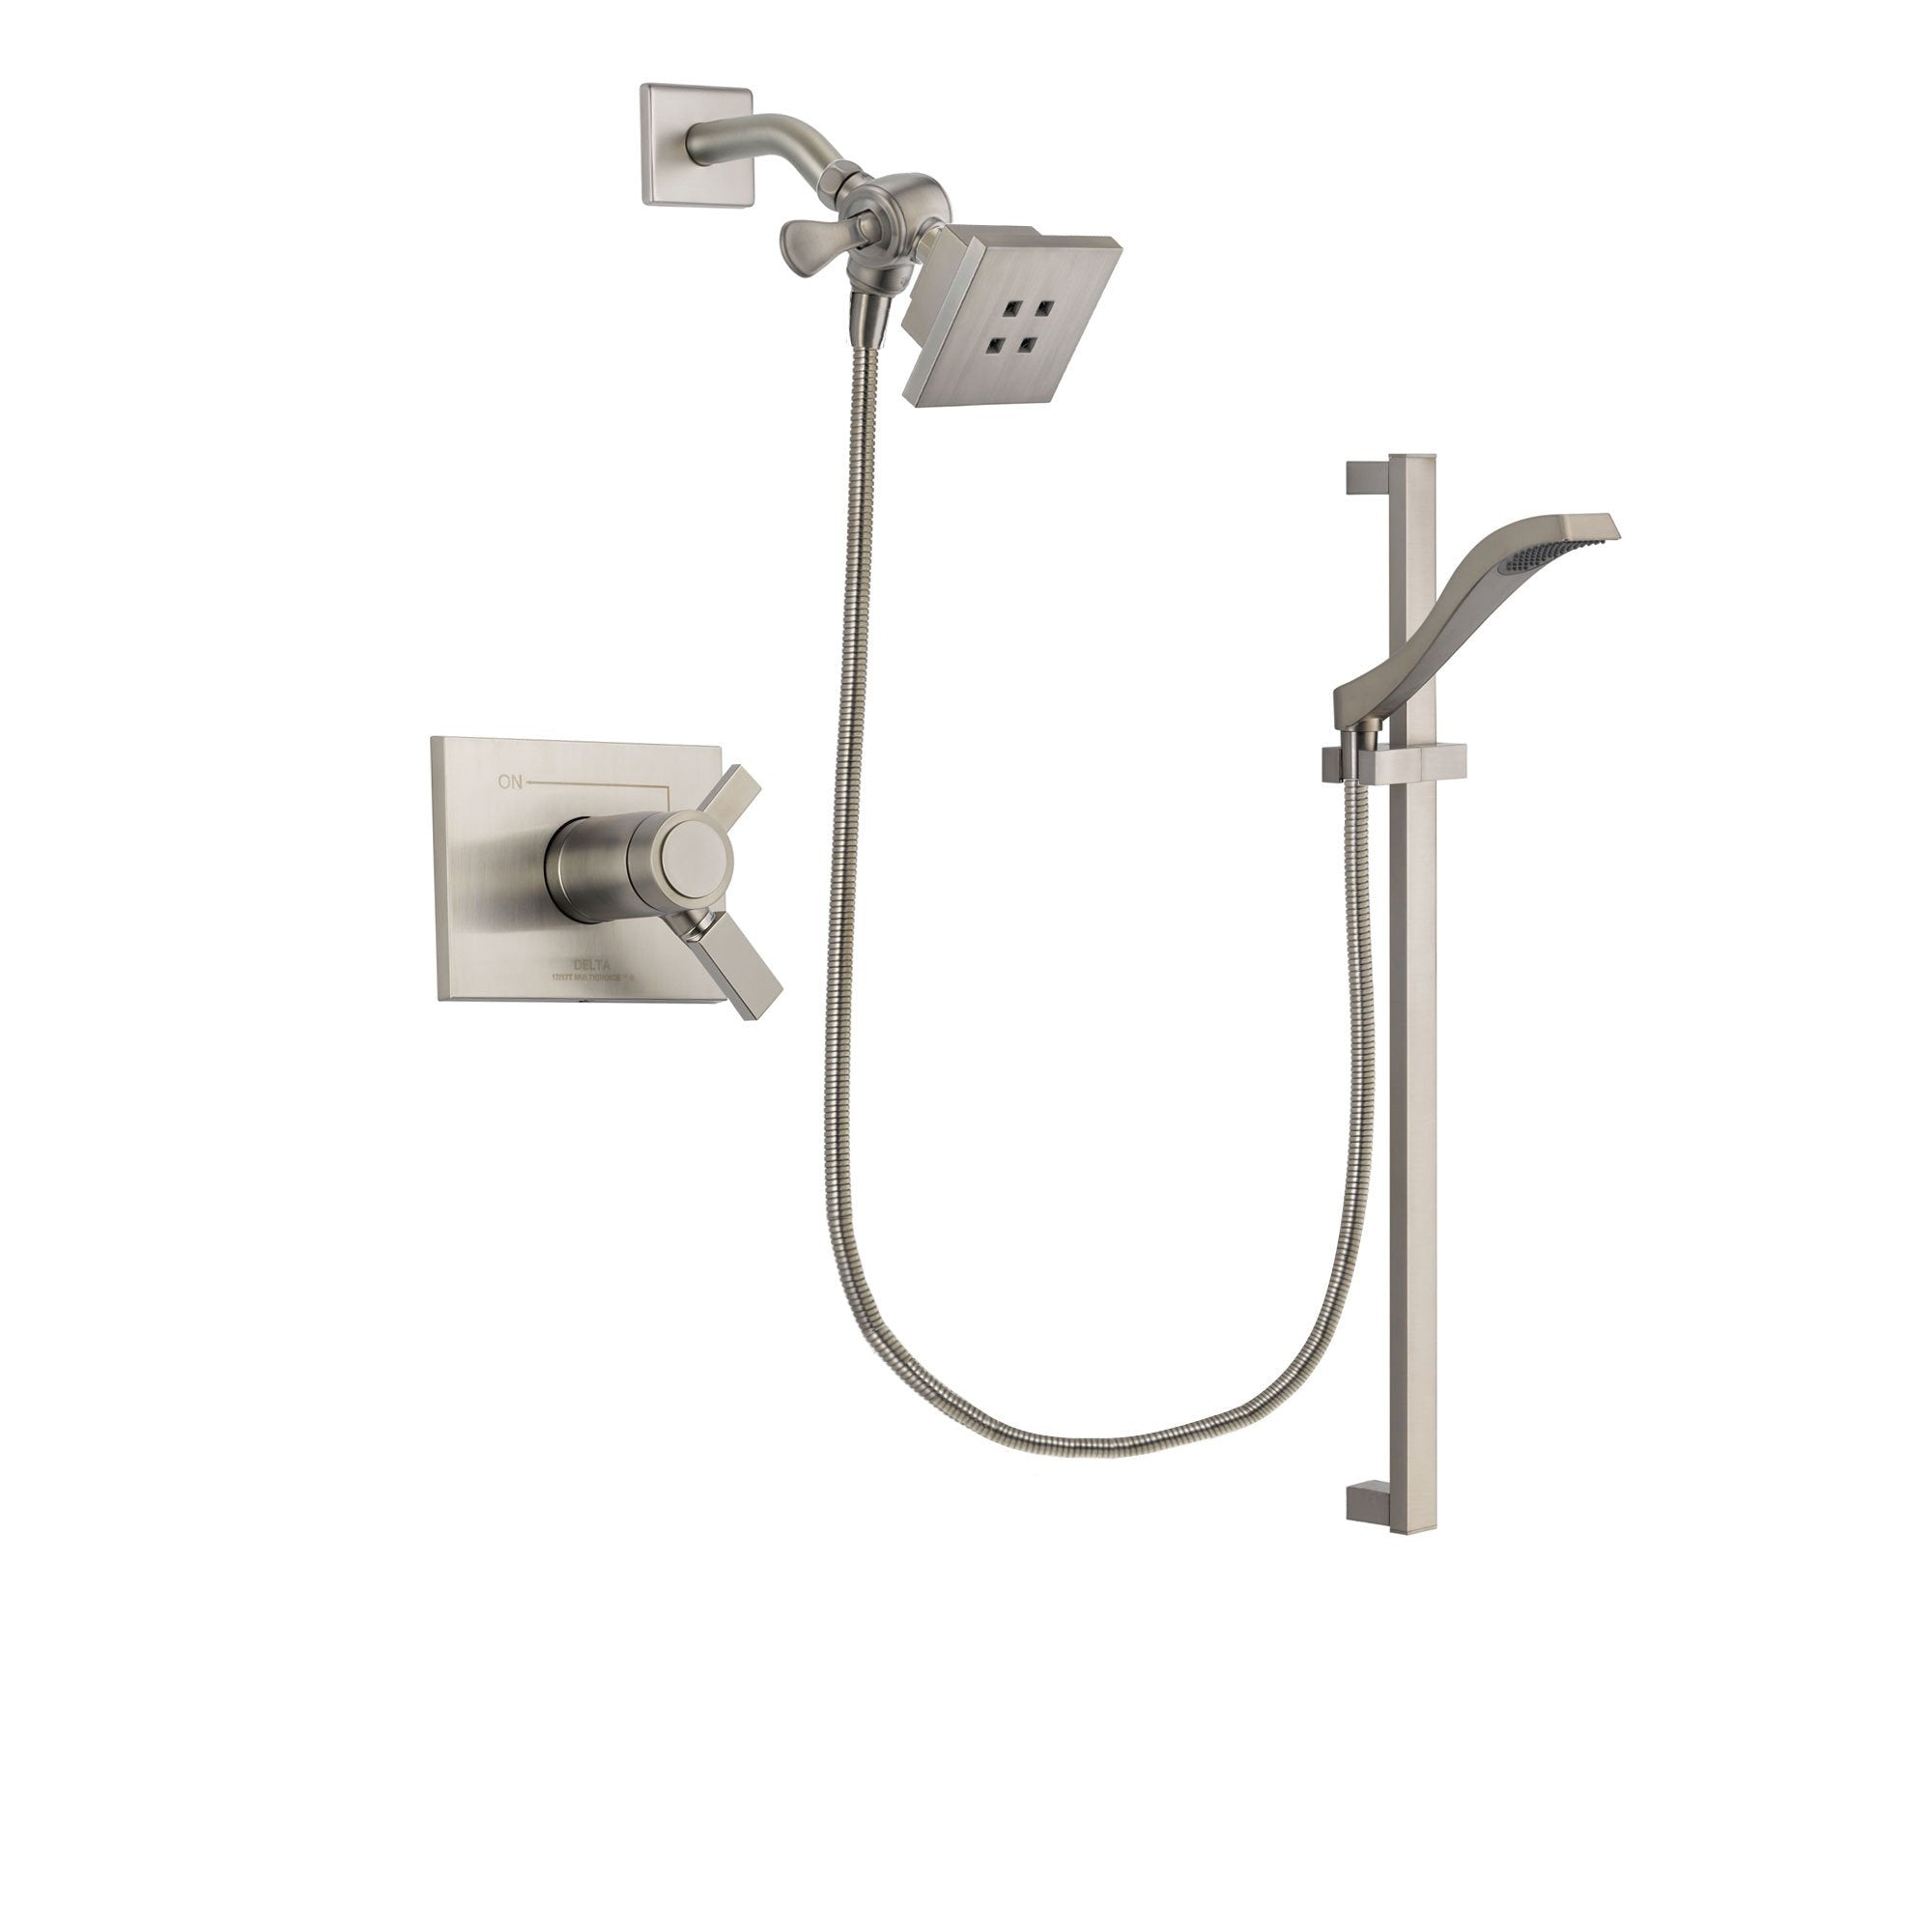 Delta Vero Stainless Steel Finish Thermostatic Shower Faucet System Package with Square Showerhead and Handheld Shower with Slide Bar Includes Rough-in Valve DSP2222V